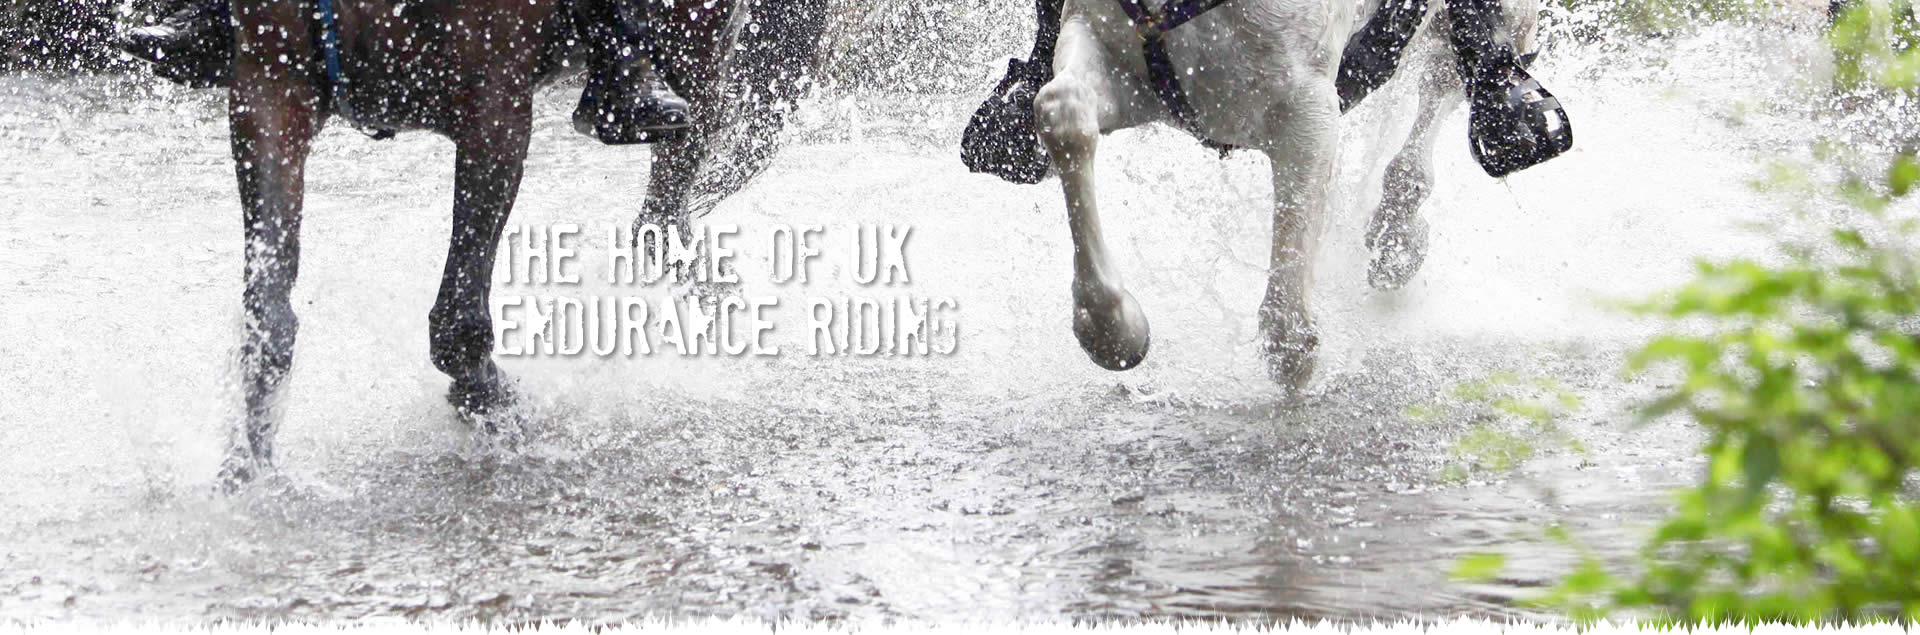 The Home of UK Endurance Riding